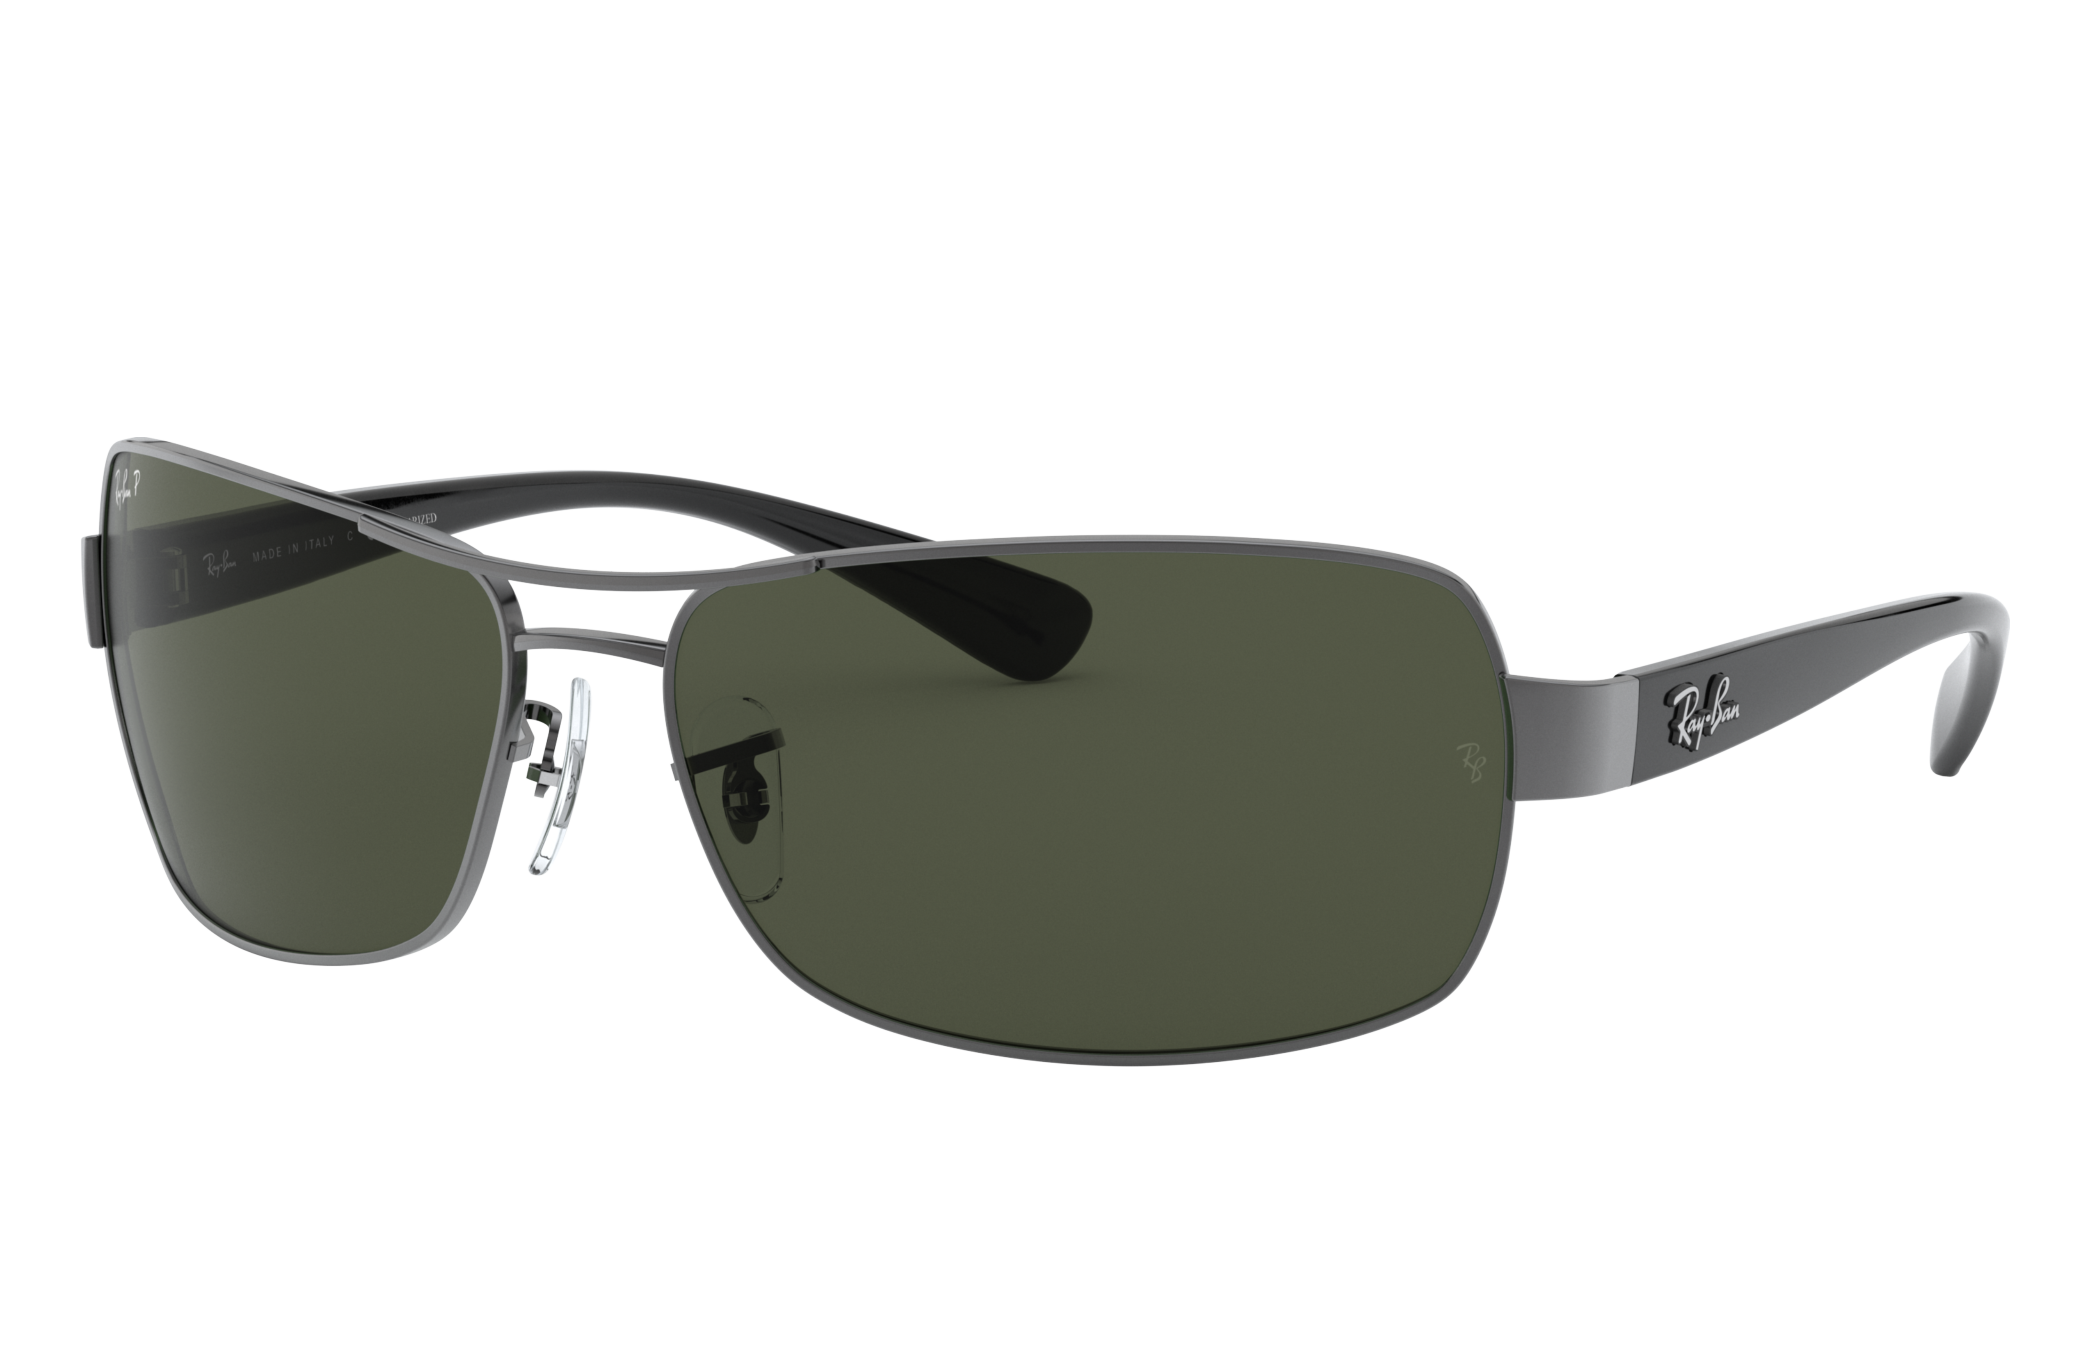 rb3379 polarized replacement lenses